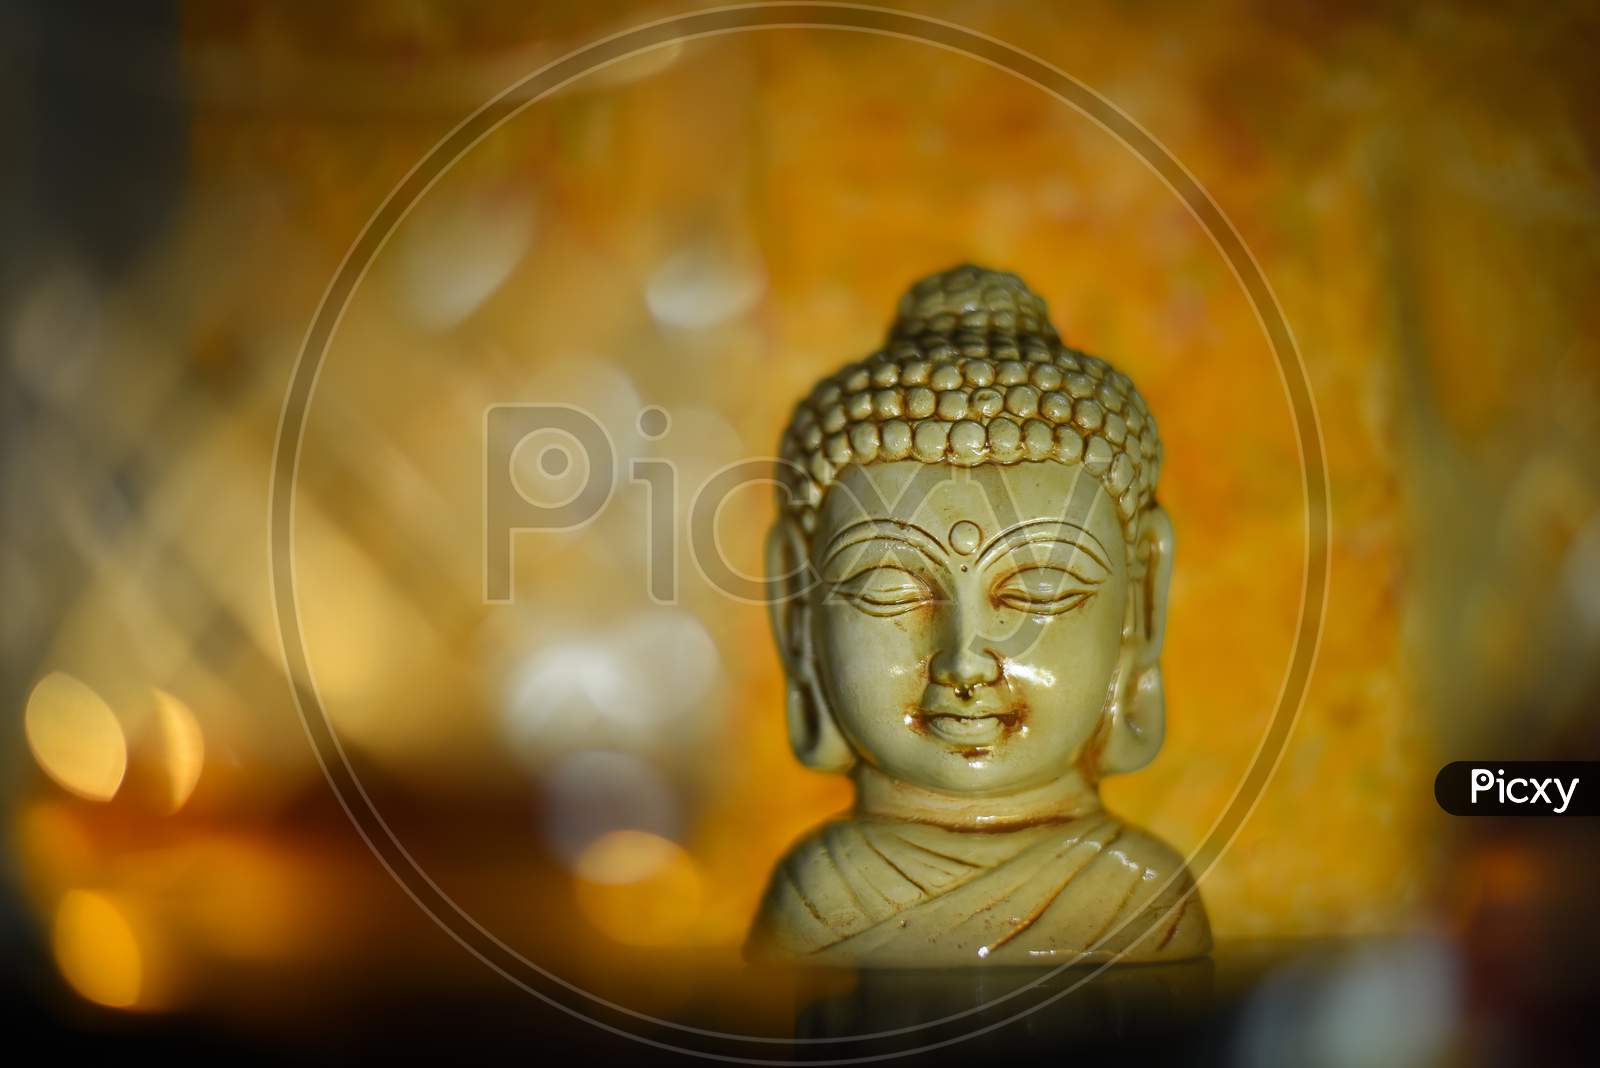 Golden Buddha statue close up .Siddhartha bronze statue. Close up of Buddha beautiful serene face with closed eyes. Best meditation inspiration image or mindfulness background.Copy space.